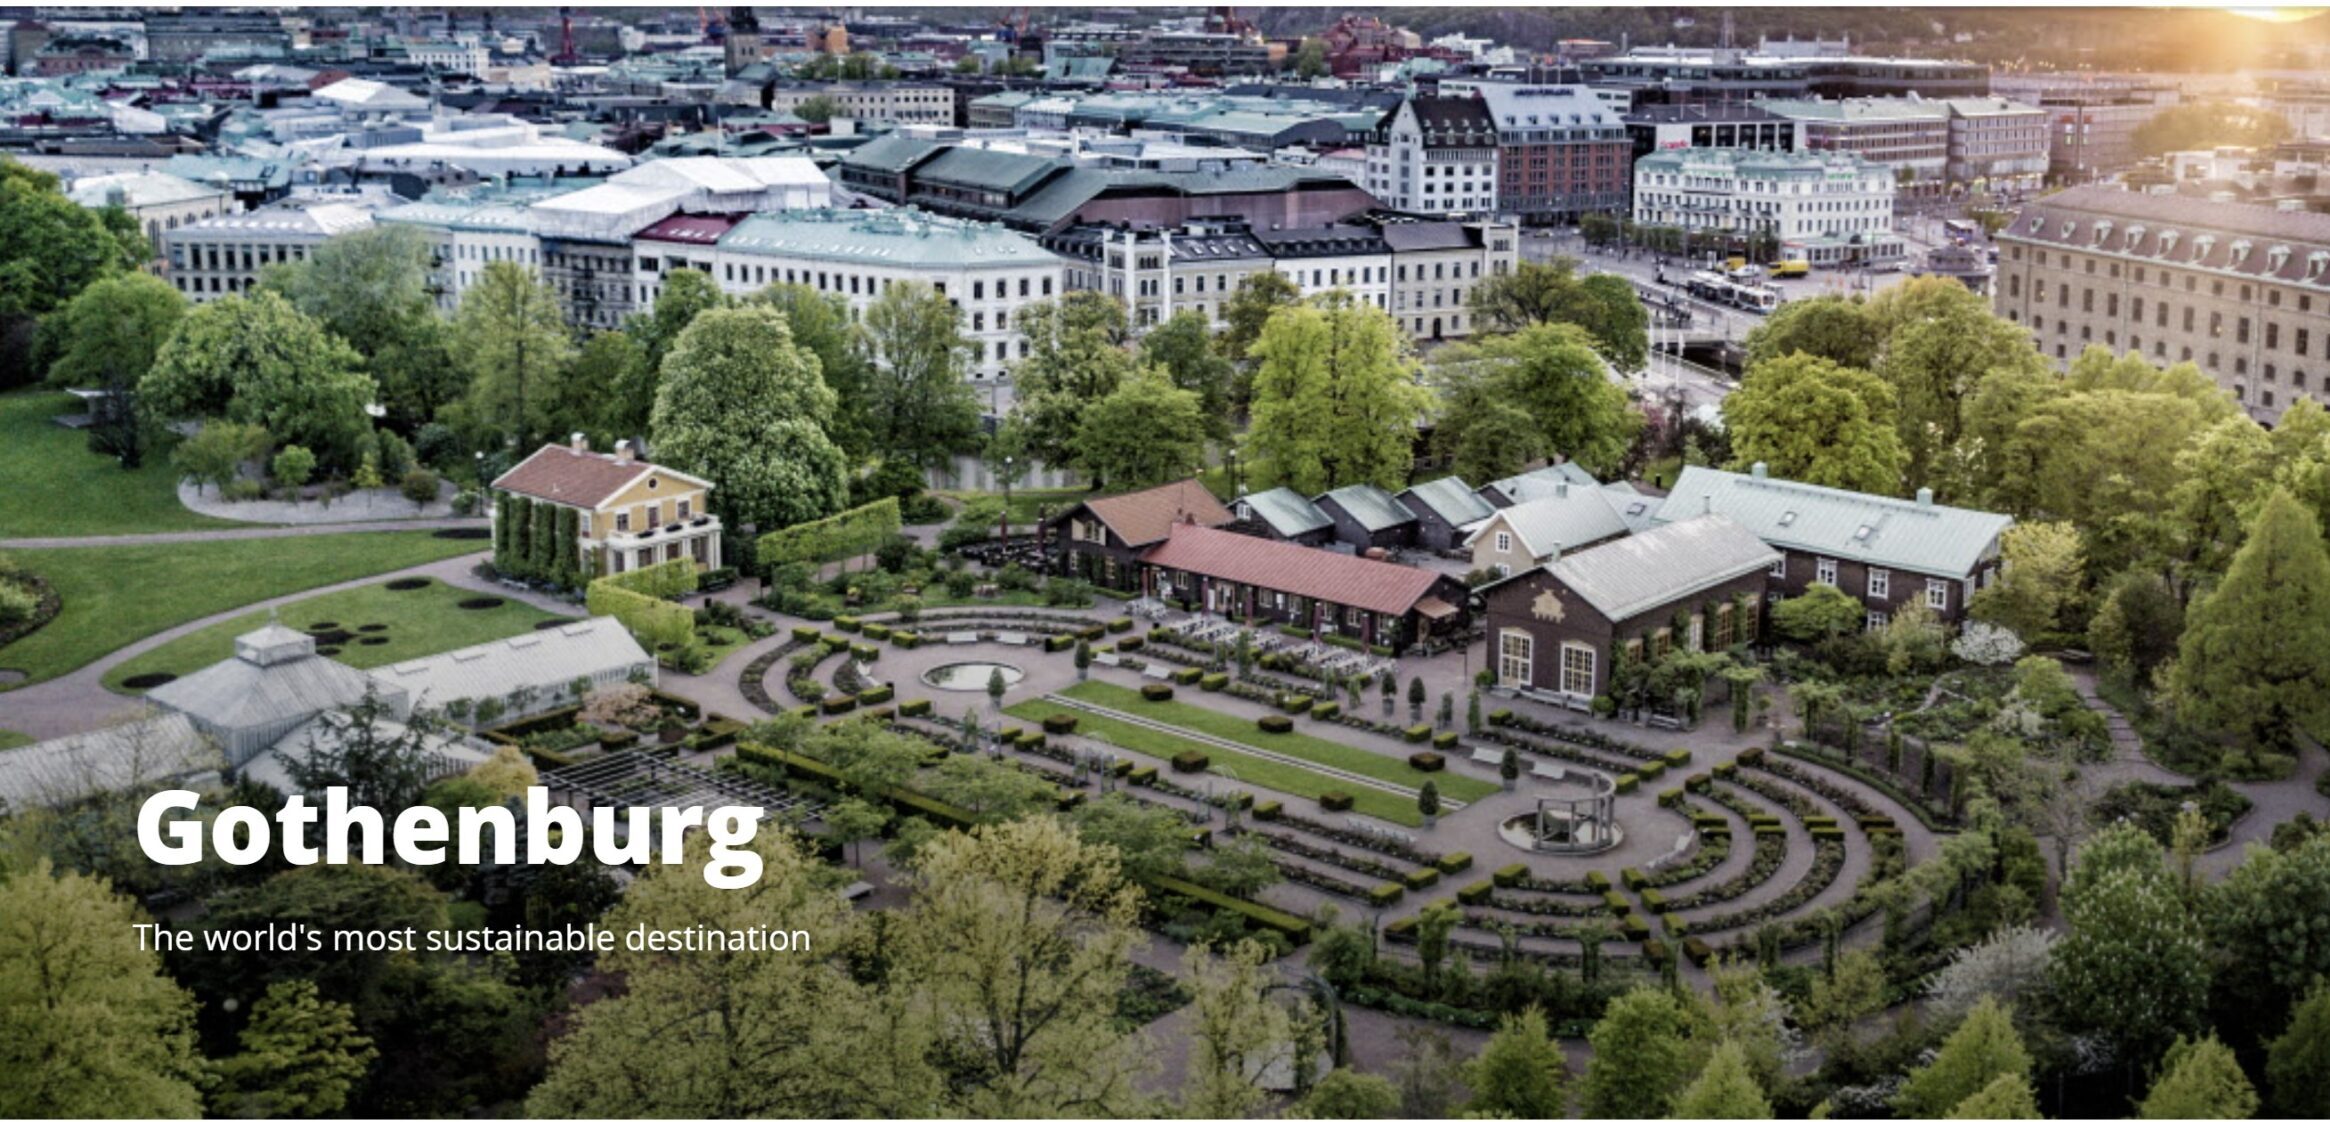 view-of-gothenburg-with-sustainable-text-